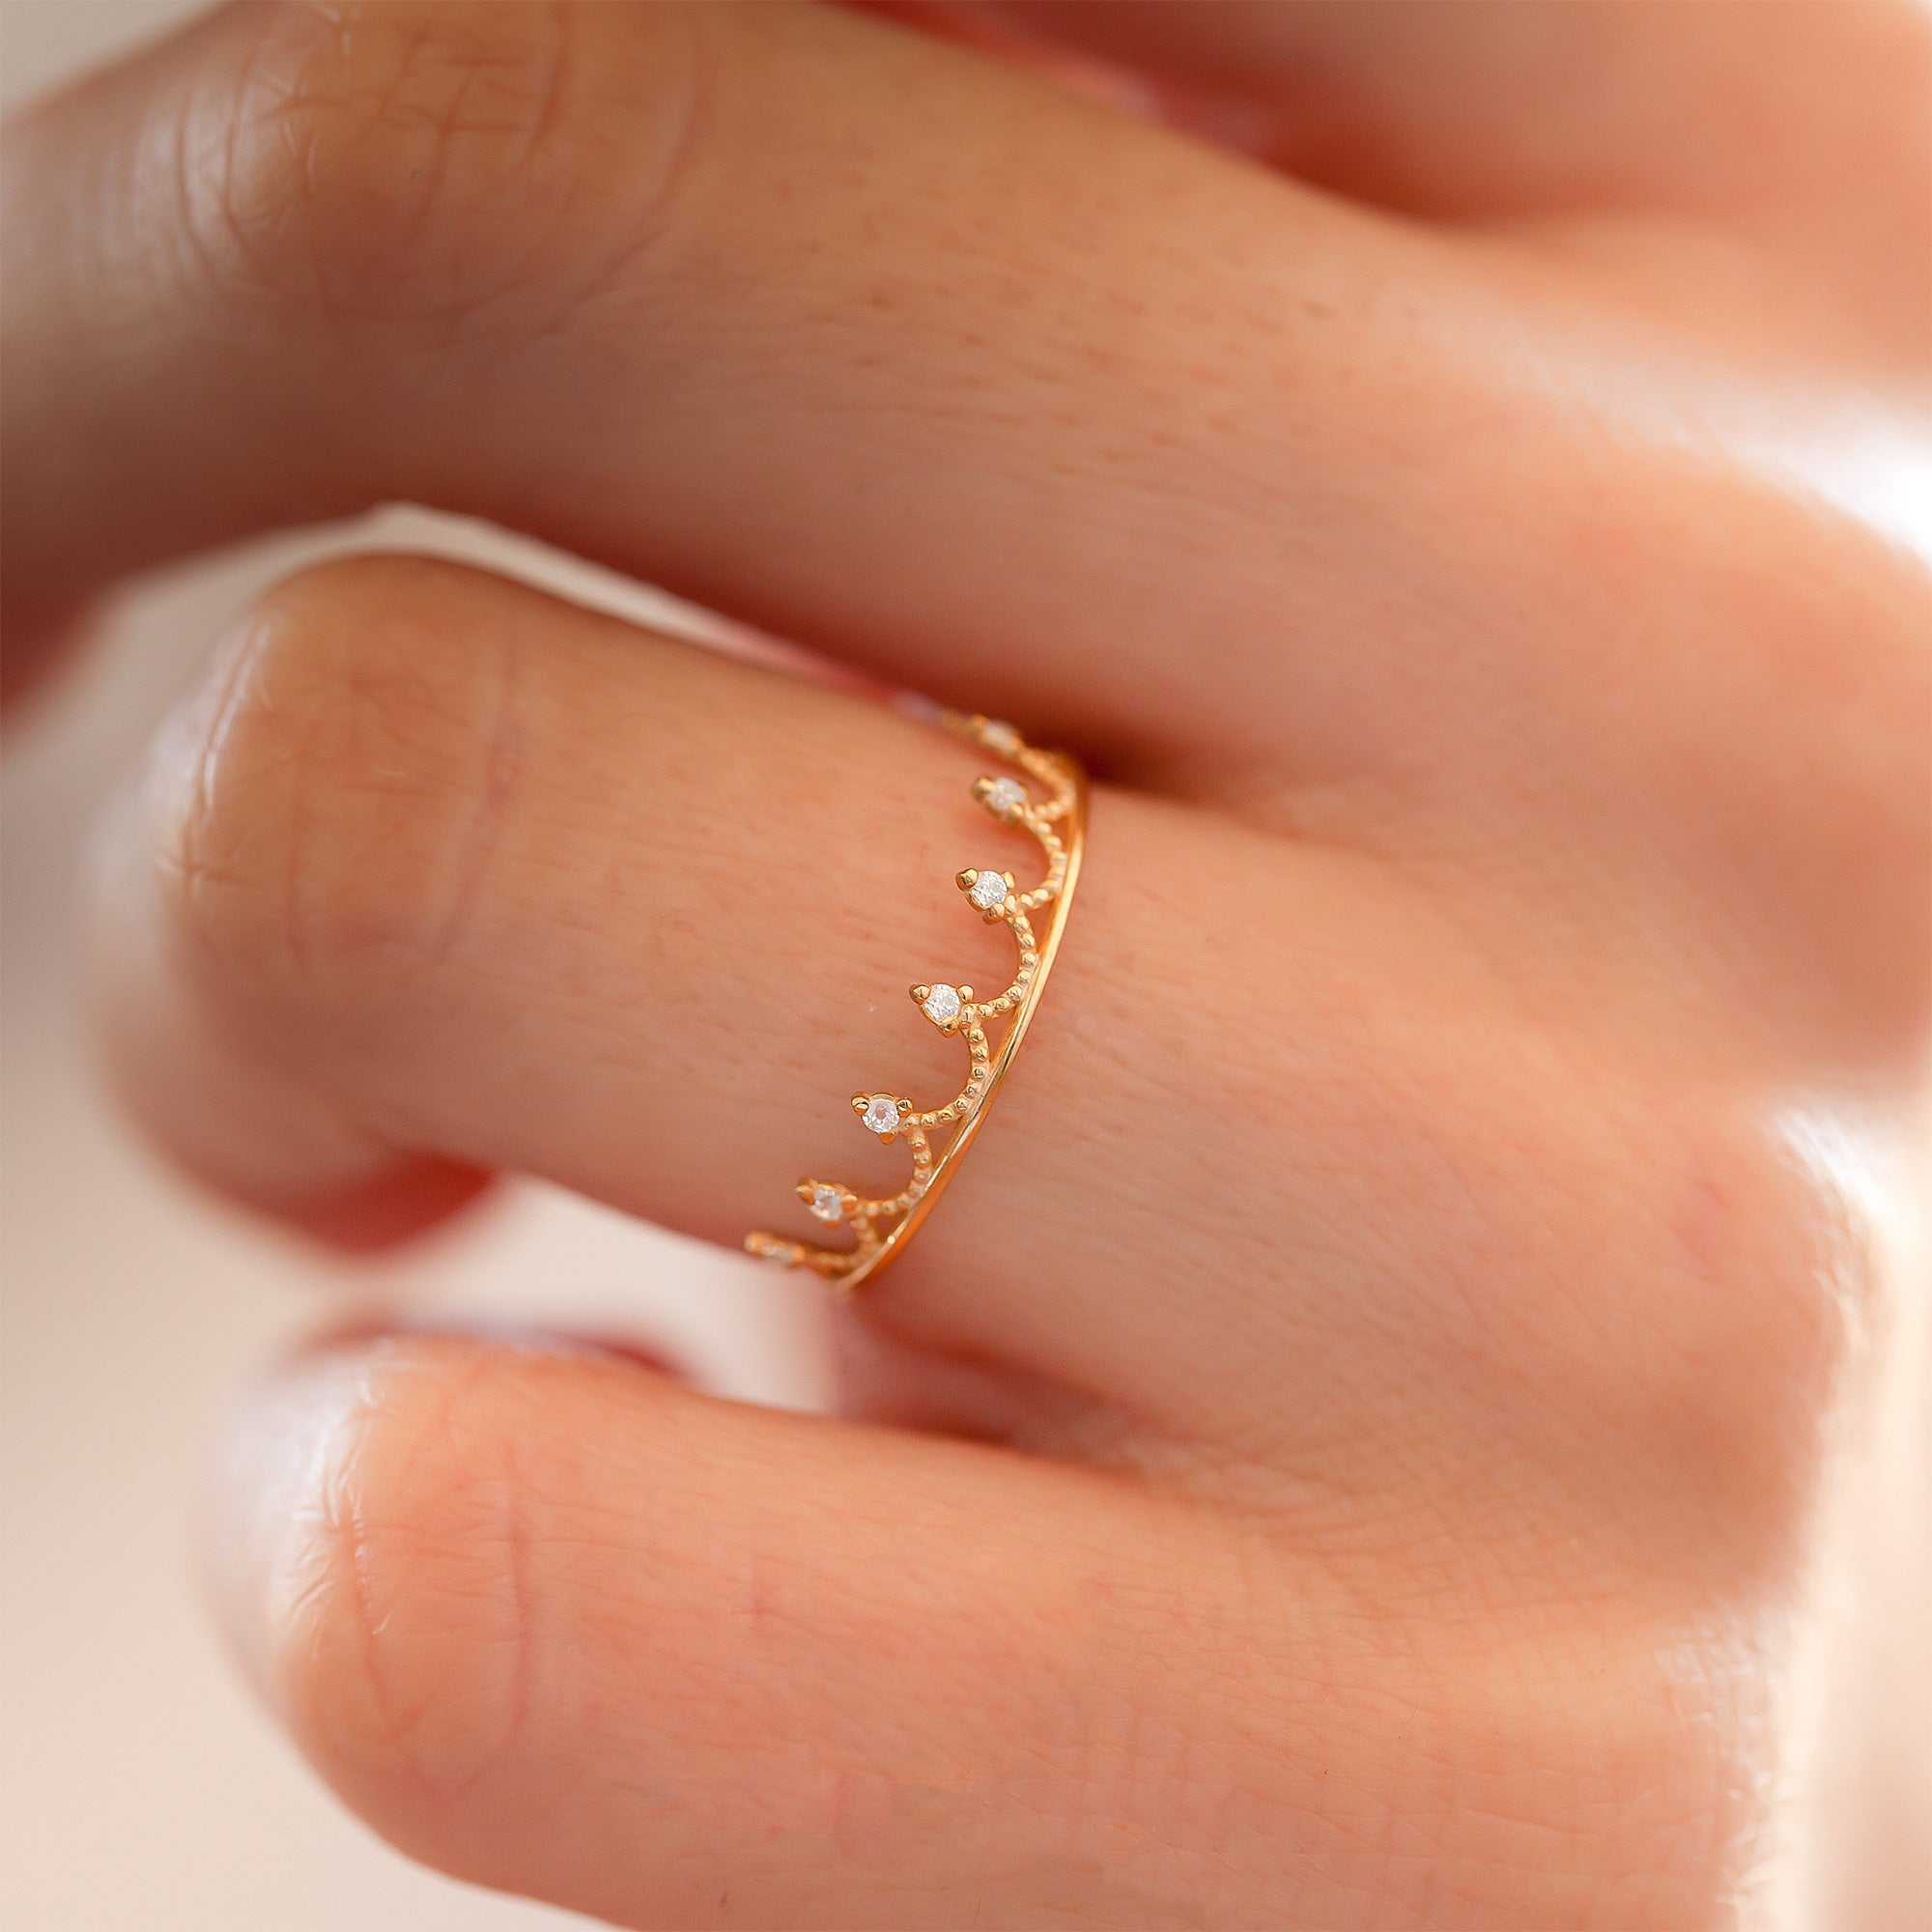 Is there a name for this ring design? : r/jewelry